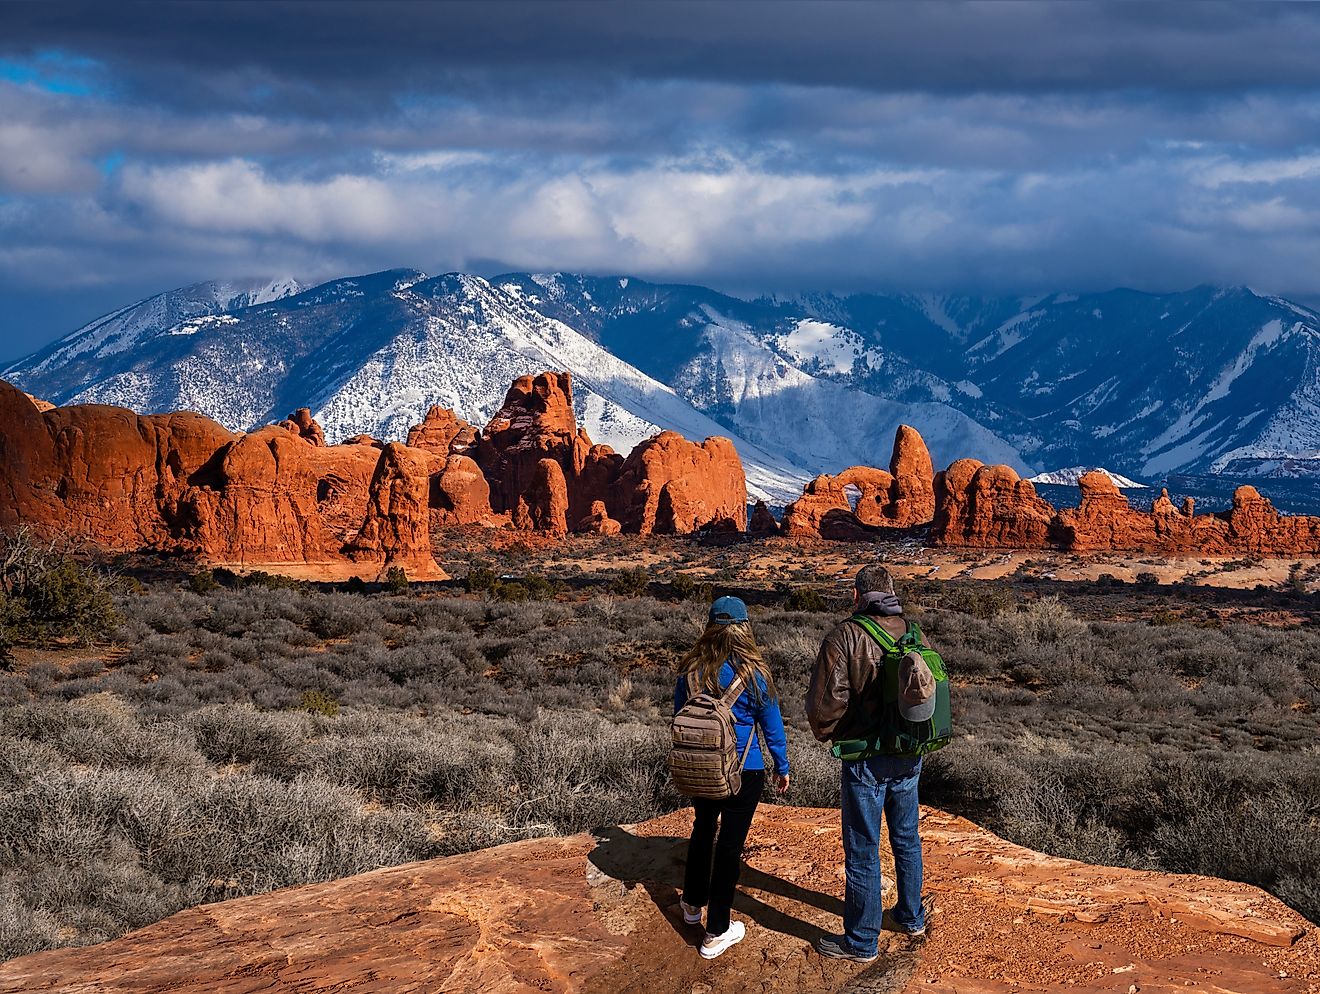 Couple enjoying a beautiful mountain view on a hiking trip in Utah, with the Windows Section of the park and snow-covered La Sal Mountains in the background. Arches National Park, Moab, Utah, USA.